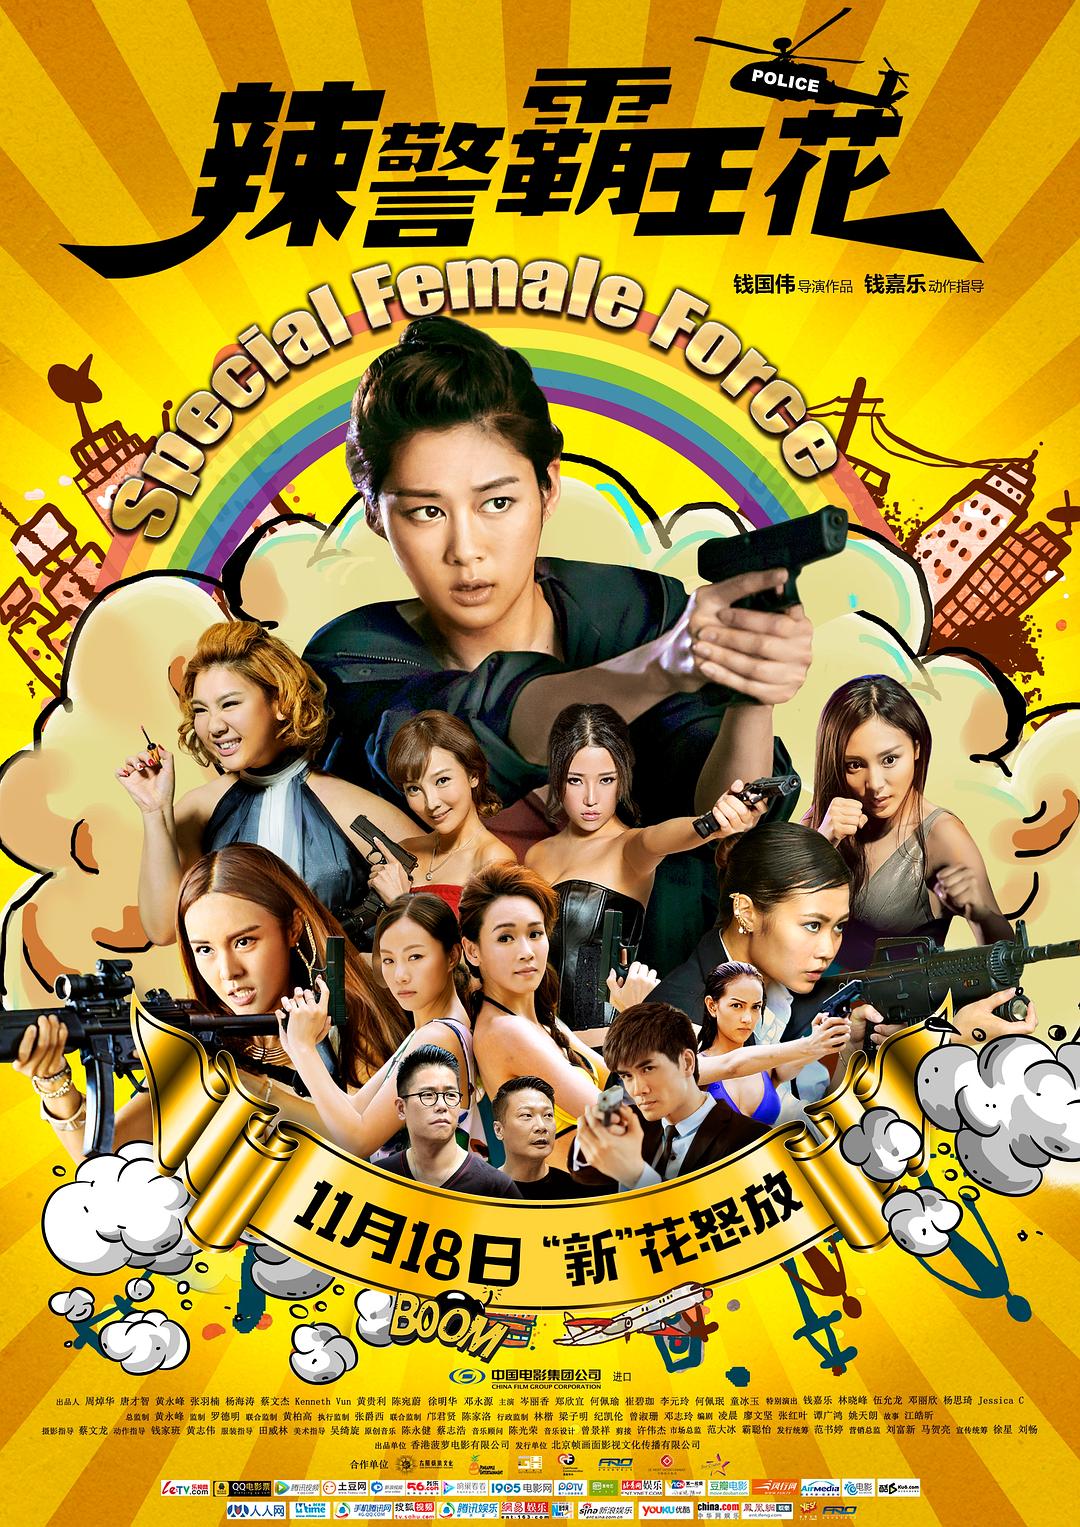  Special.Female.Force.2016.CHINESE.1080p.BluRay.x264.DTS-FGT 9.28GB-1.png